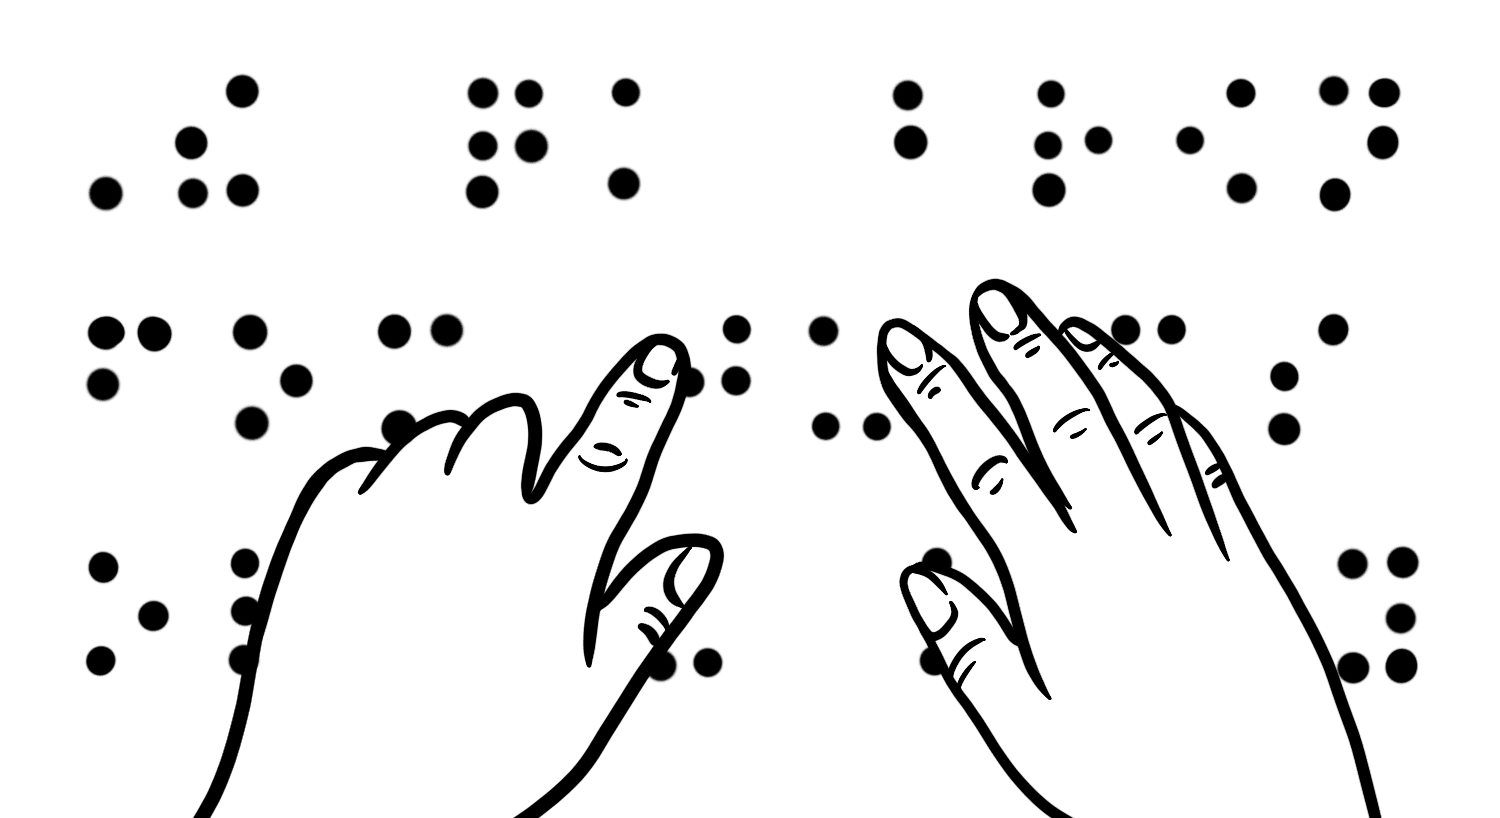 Illustration: A person’s hands move over a Braille passage.